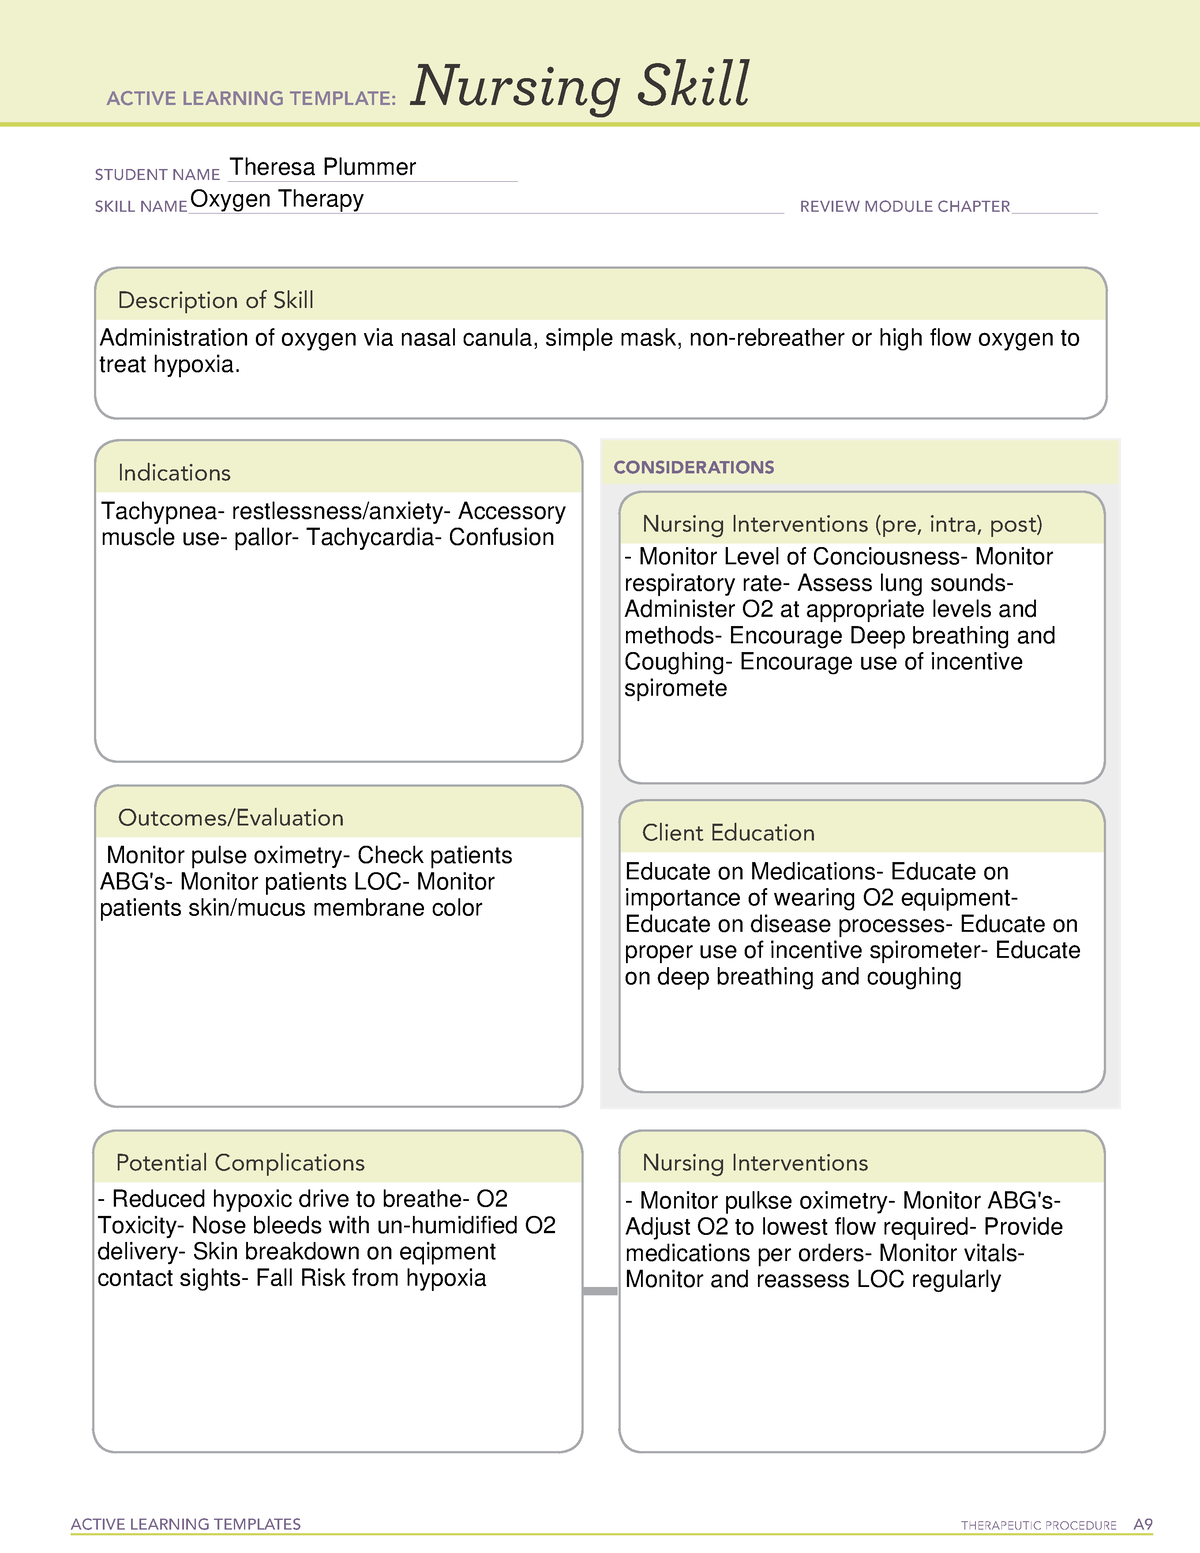 Nursing Skill Oxygen therapy - ACTIVE LEARNING TEMPLATES THERAPEUTIC ...